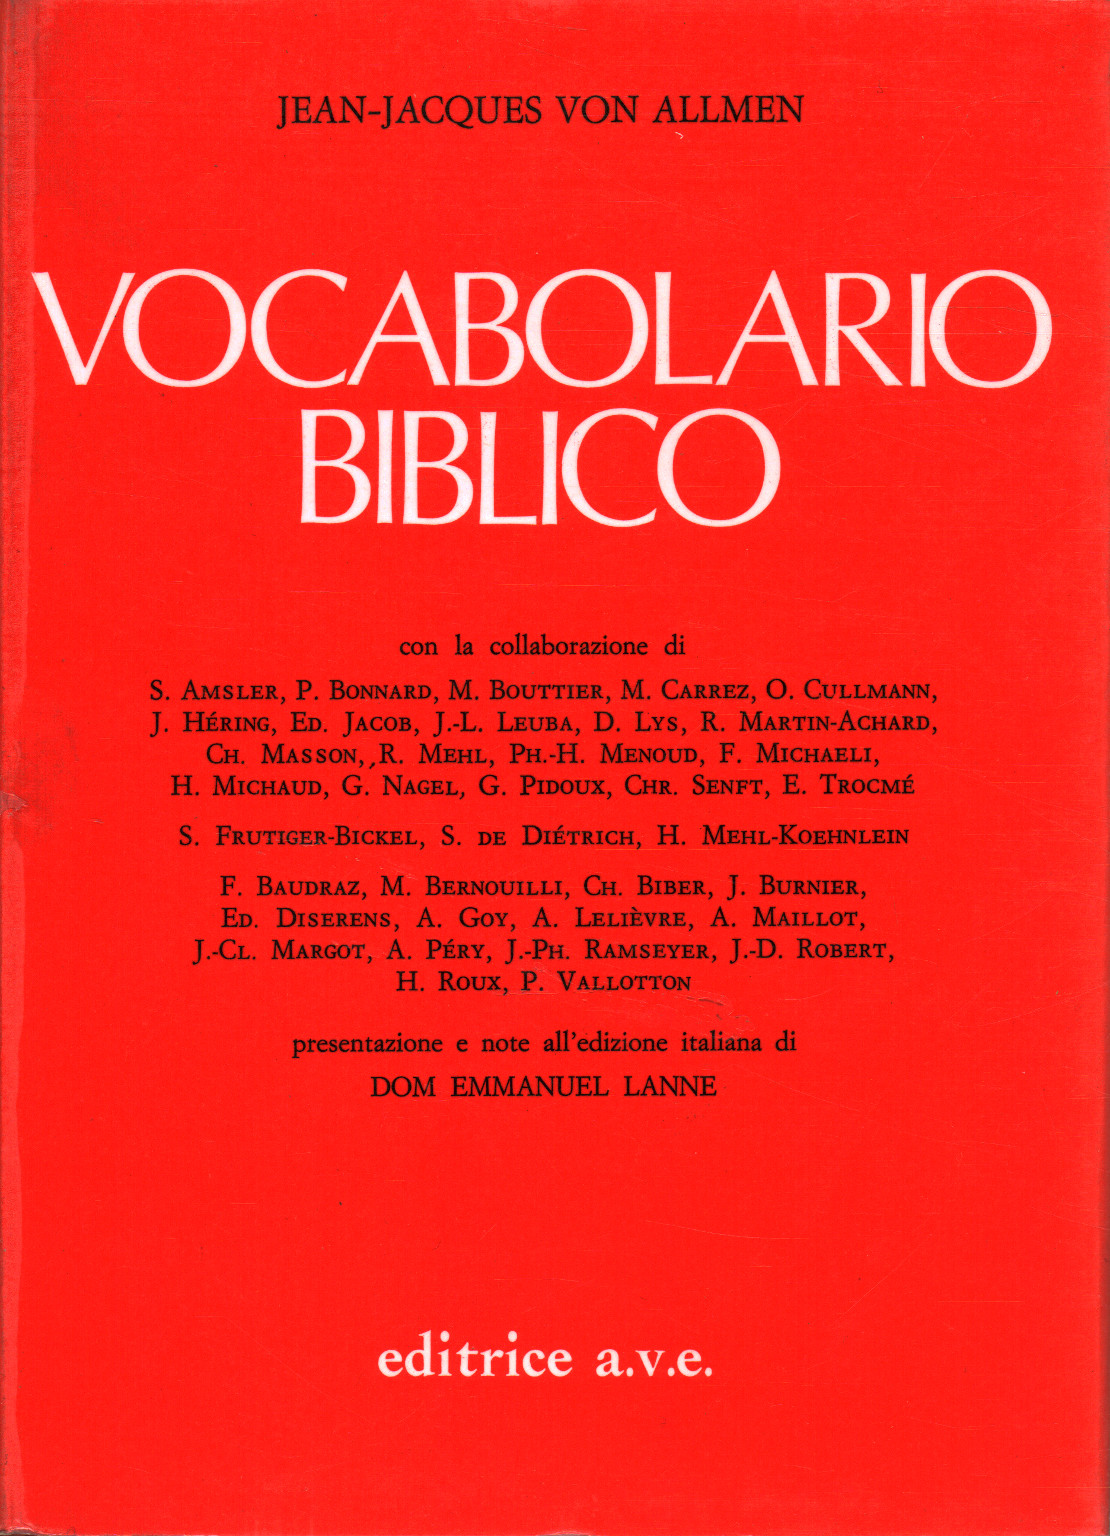 Vocabulary of the bible, s.a.